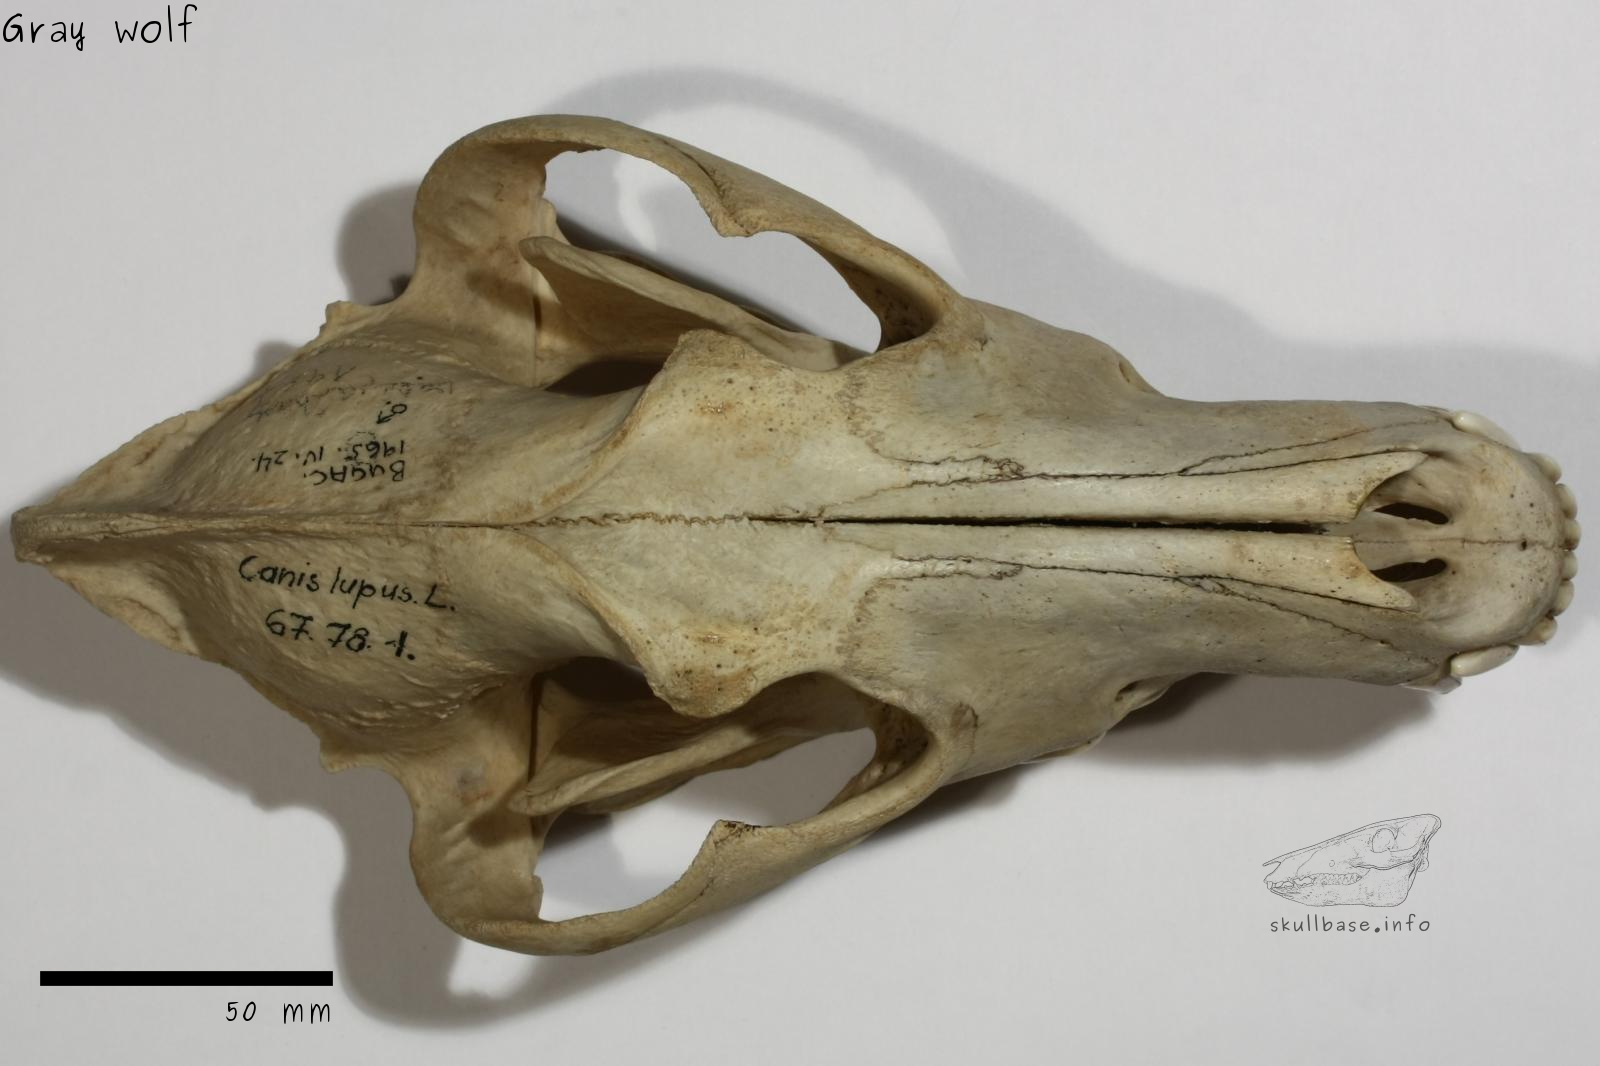 Gray wolf (Canis lupus) skull dorsal view